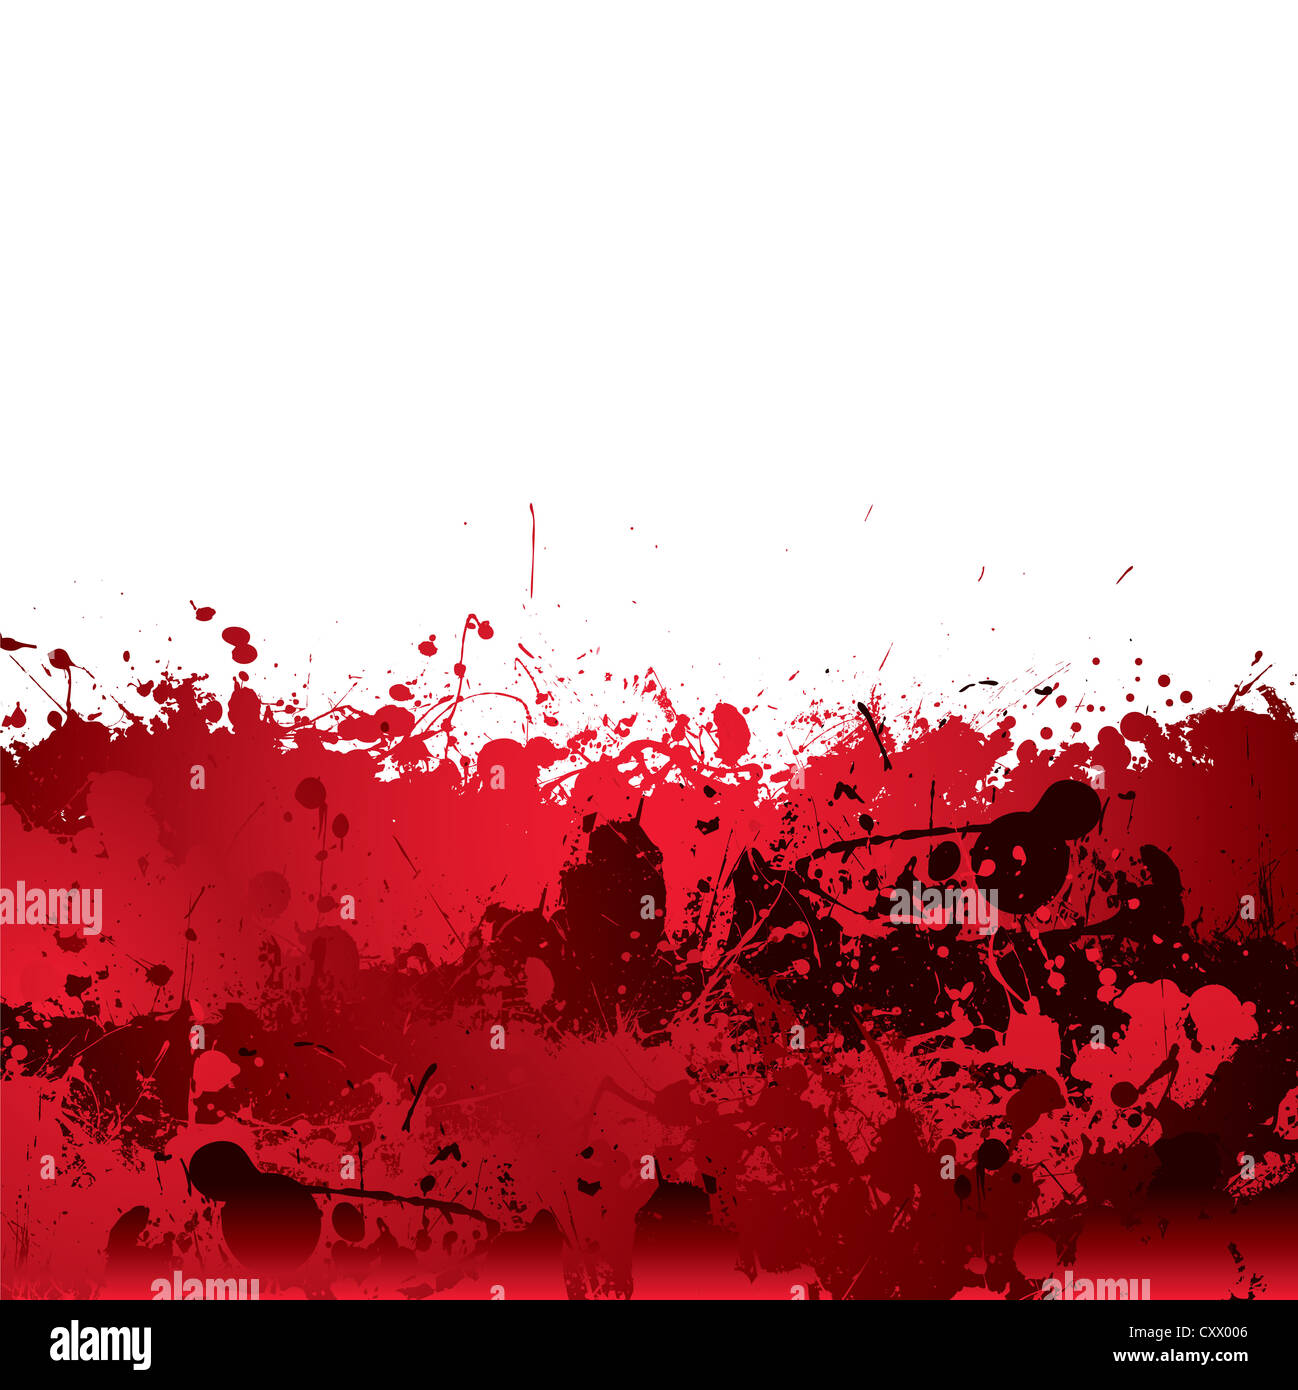 Red blood splatter background with dribble effect Stock Photo - Alamy